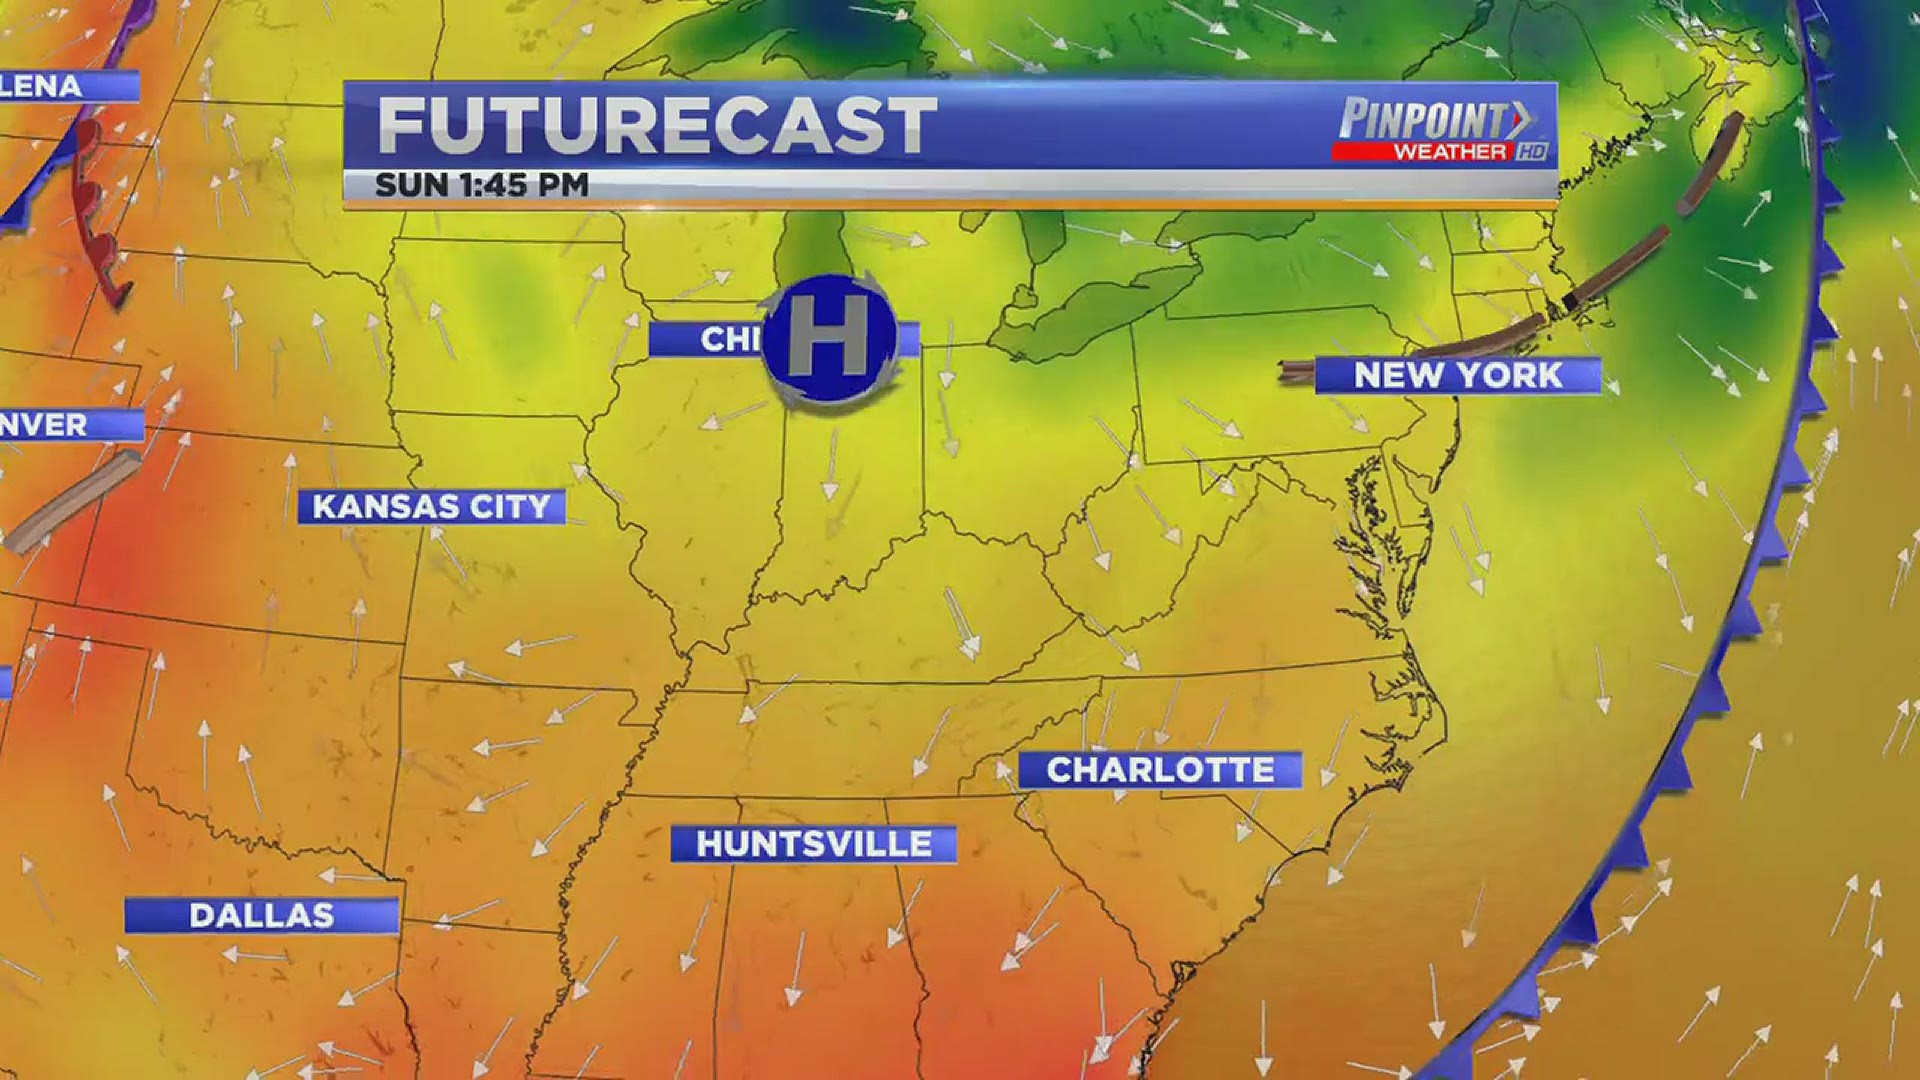 high pressure will control our forecast for the next several days.